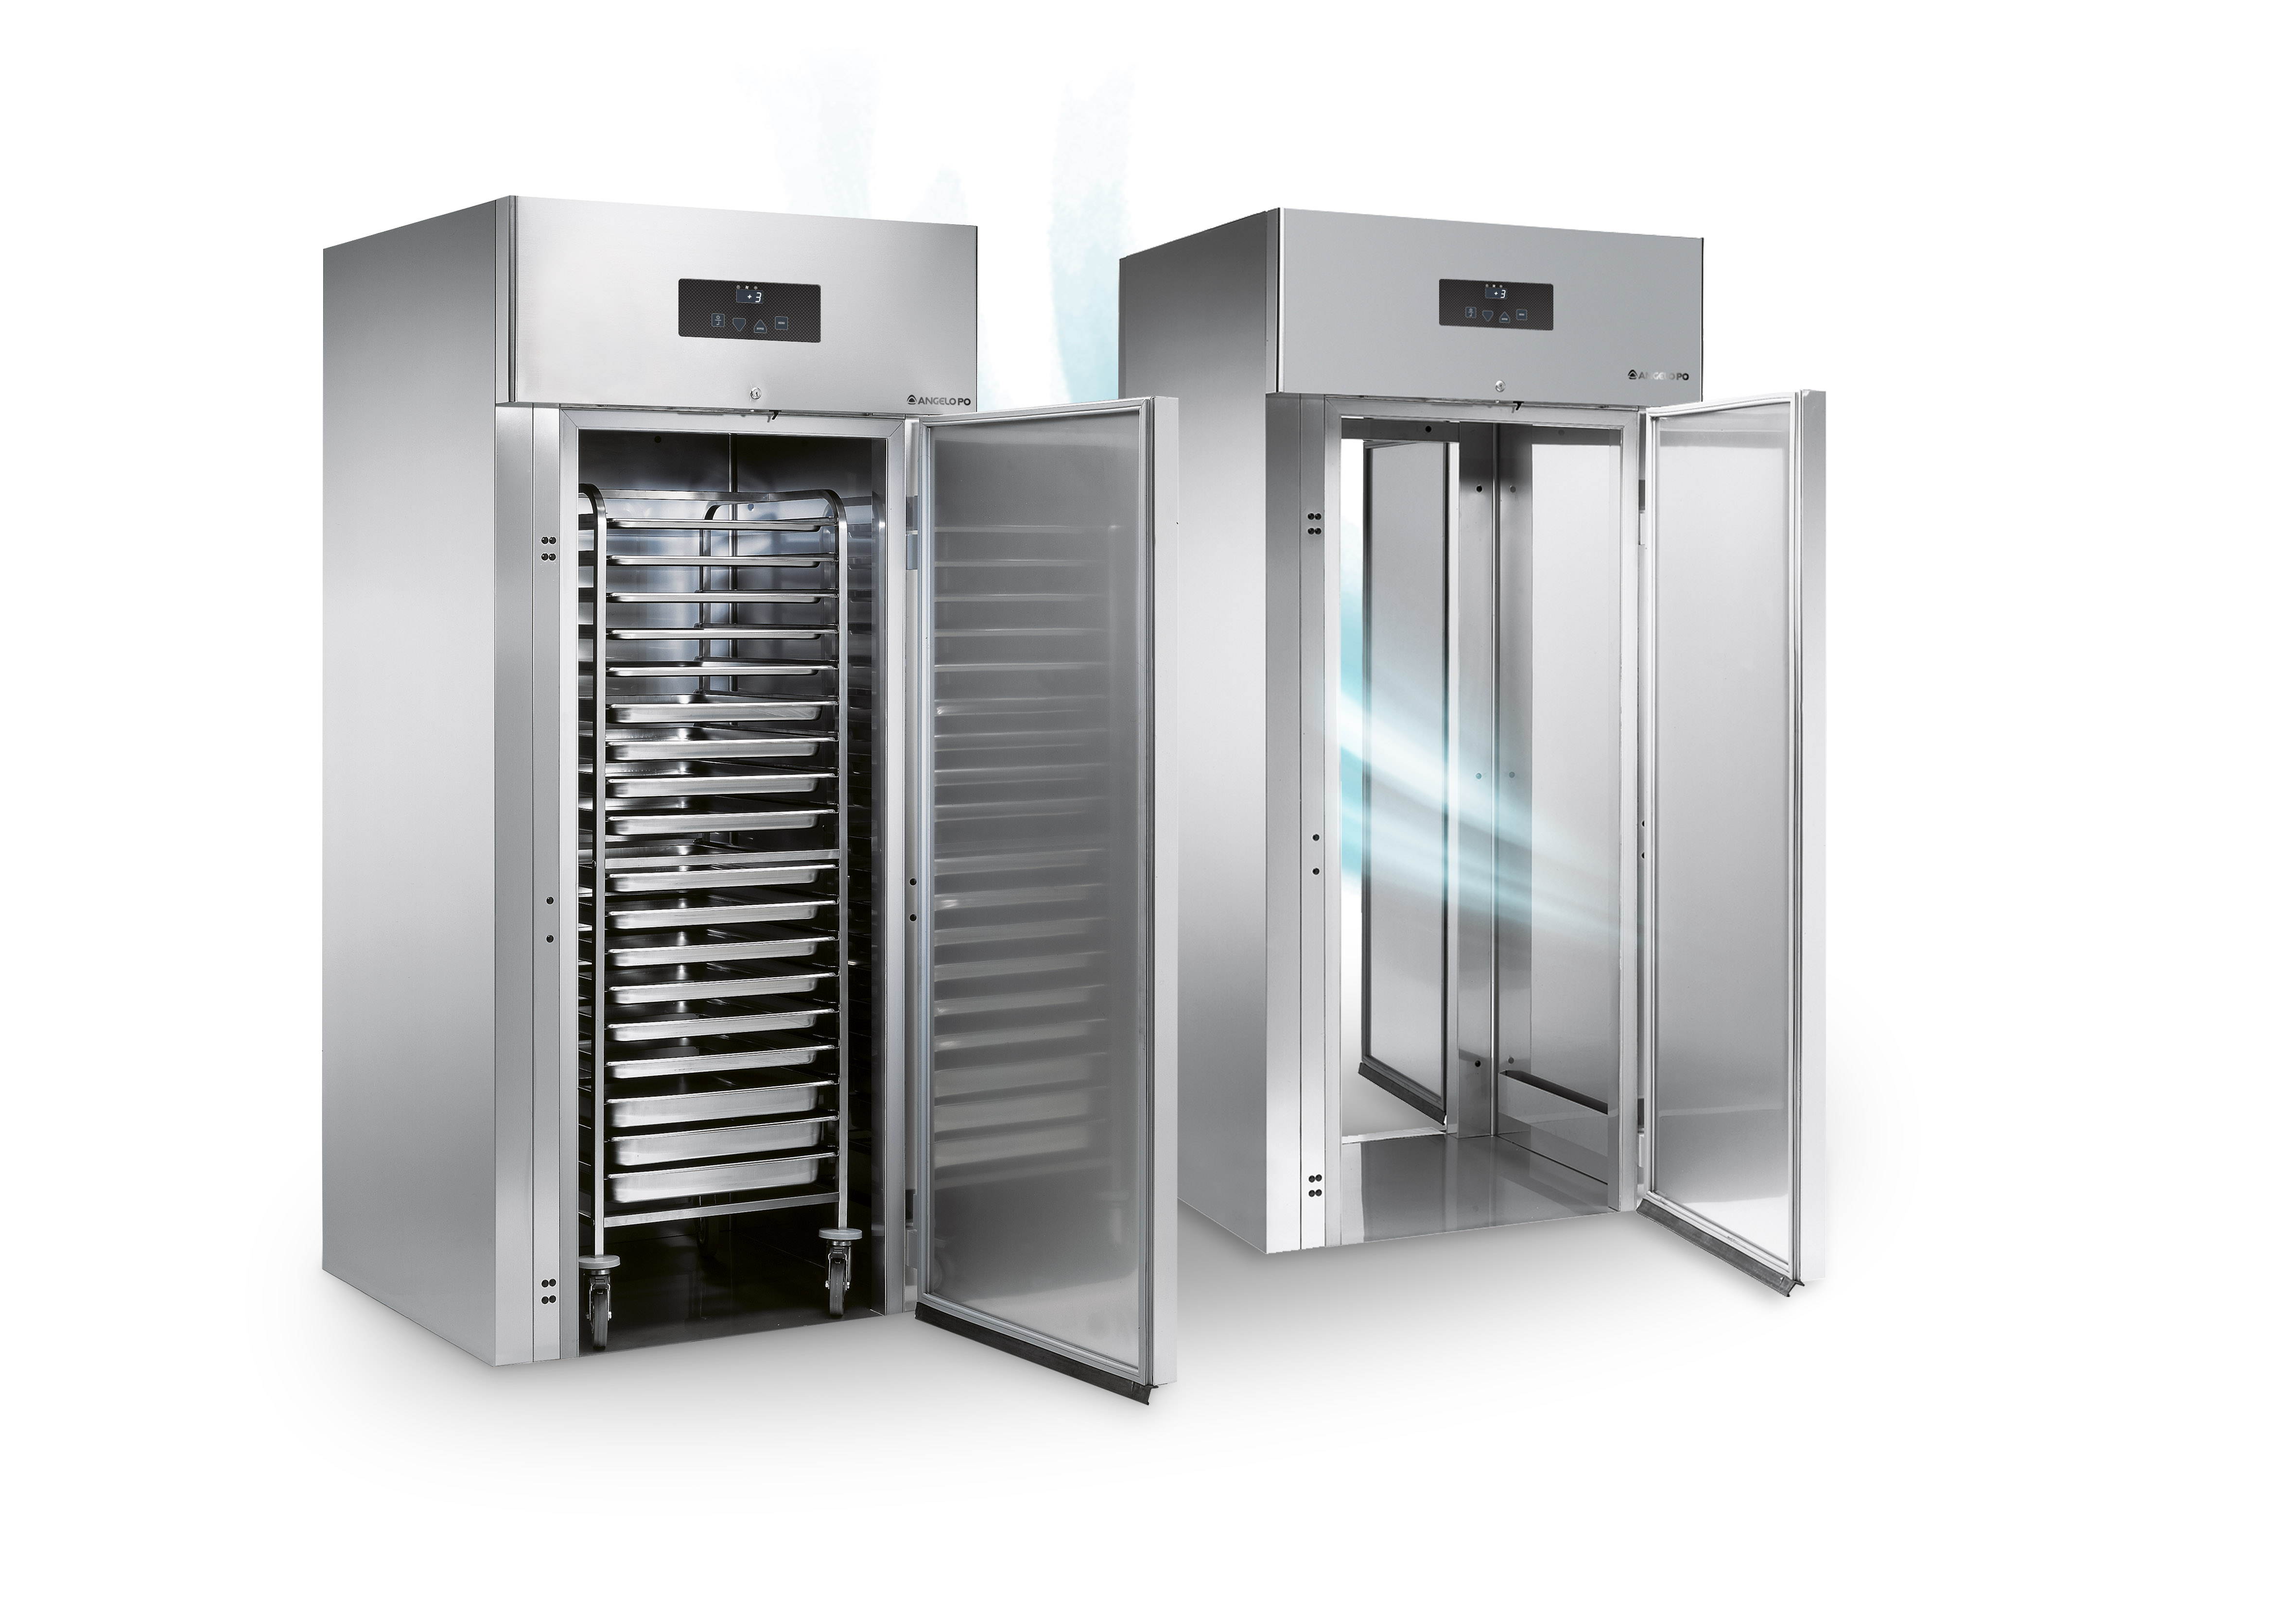 Angelo Po Available In Doha Qatar-REFRIGERATORS-ROLL-IN